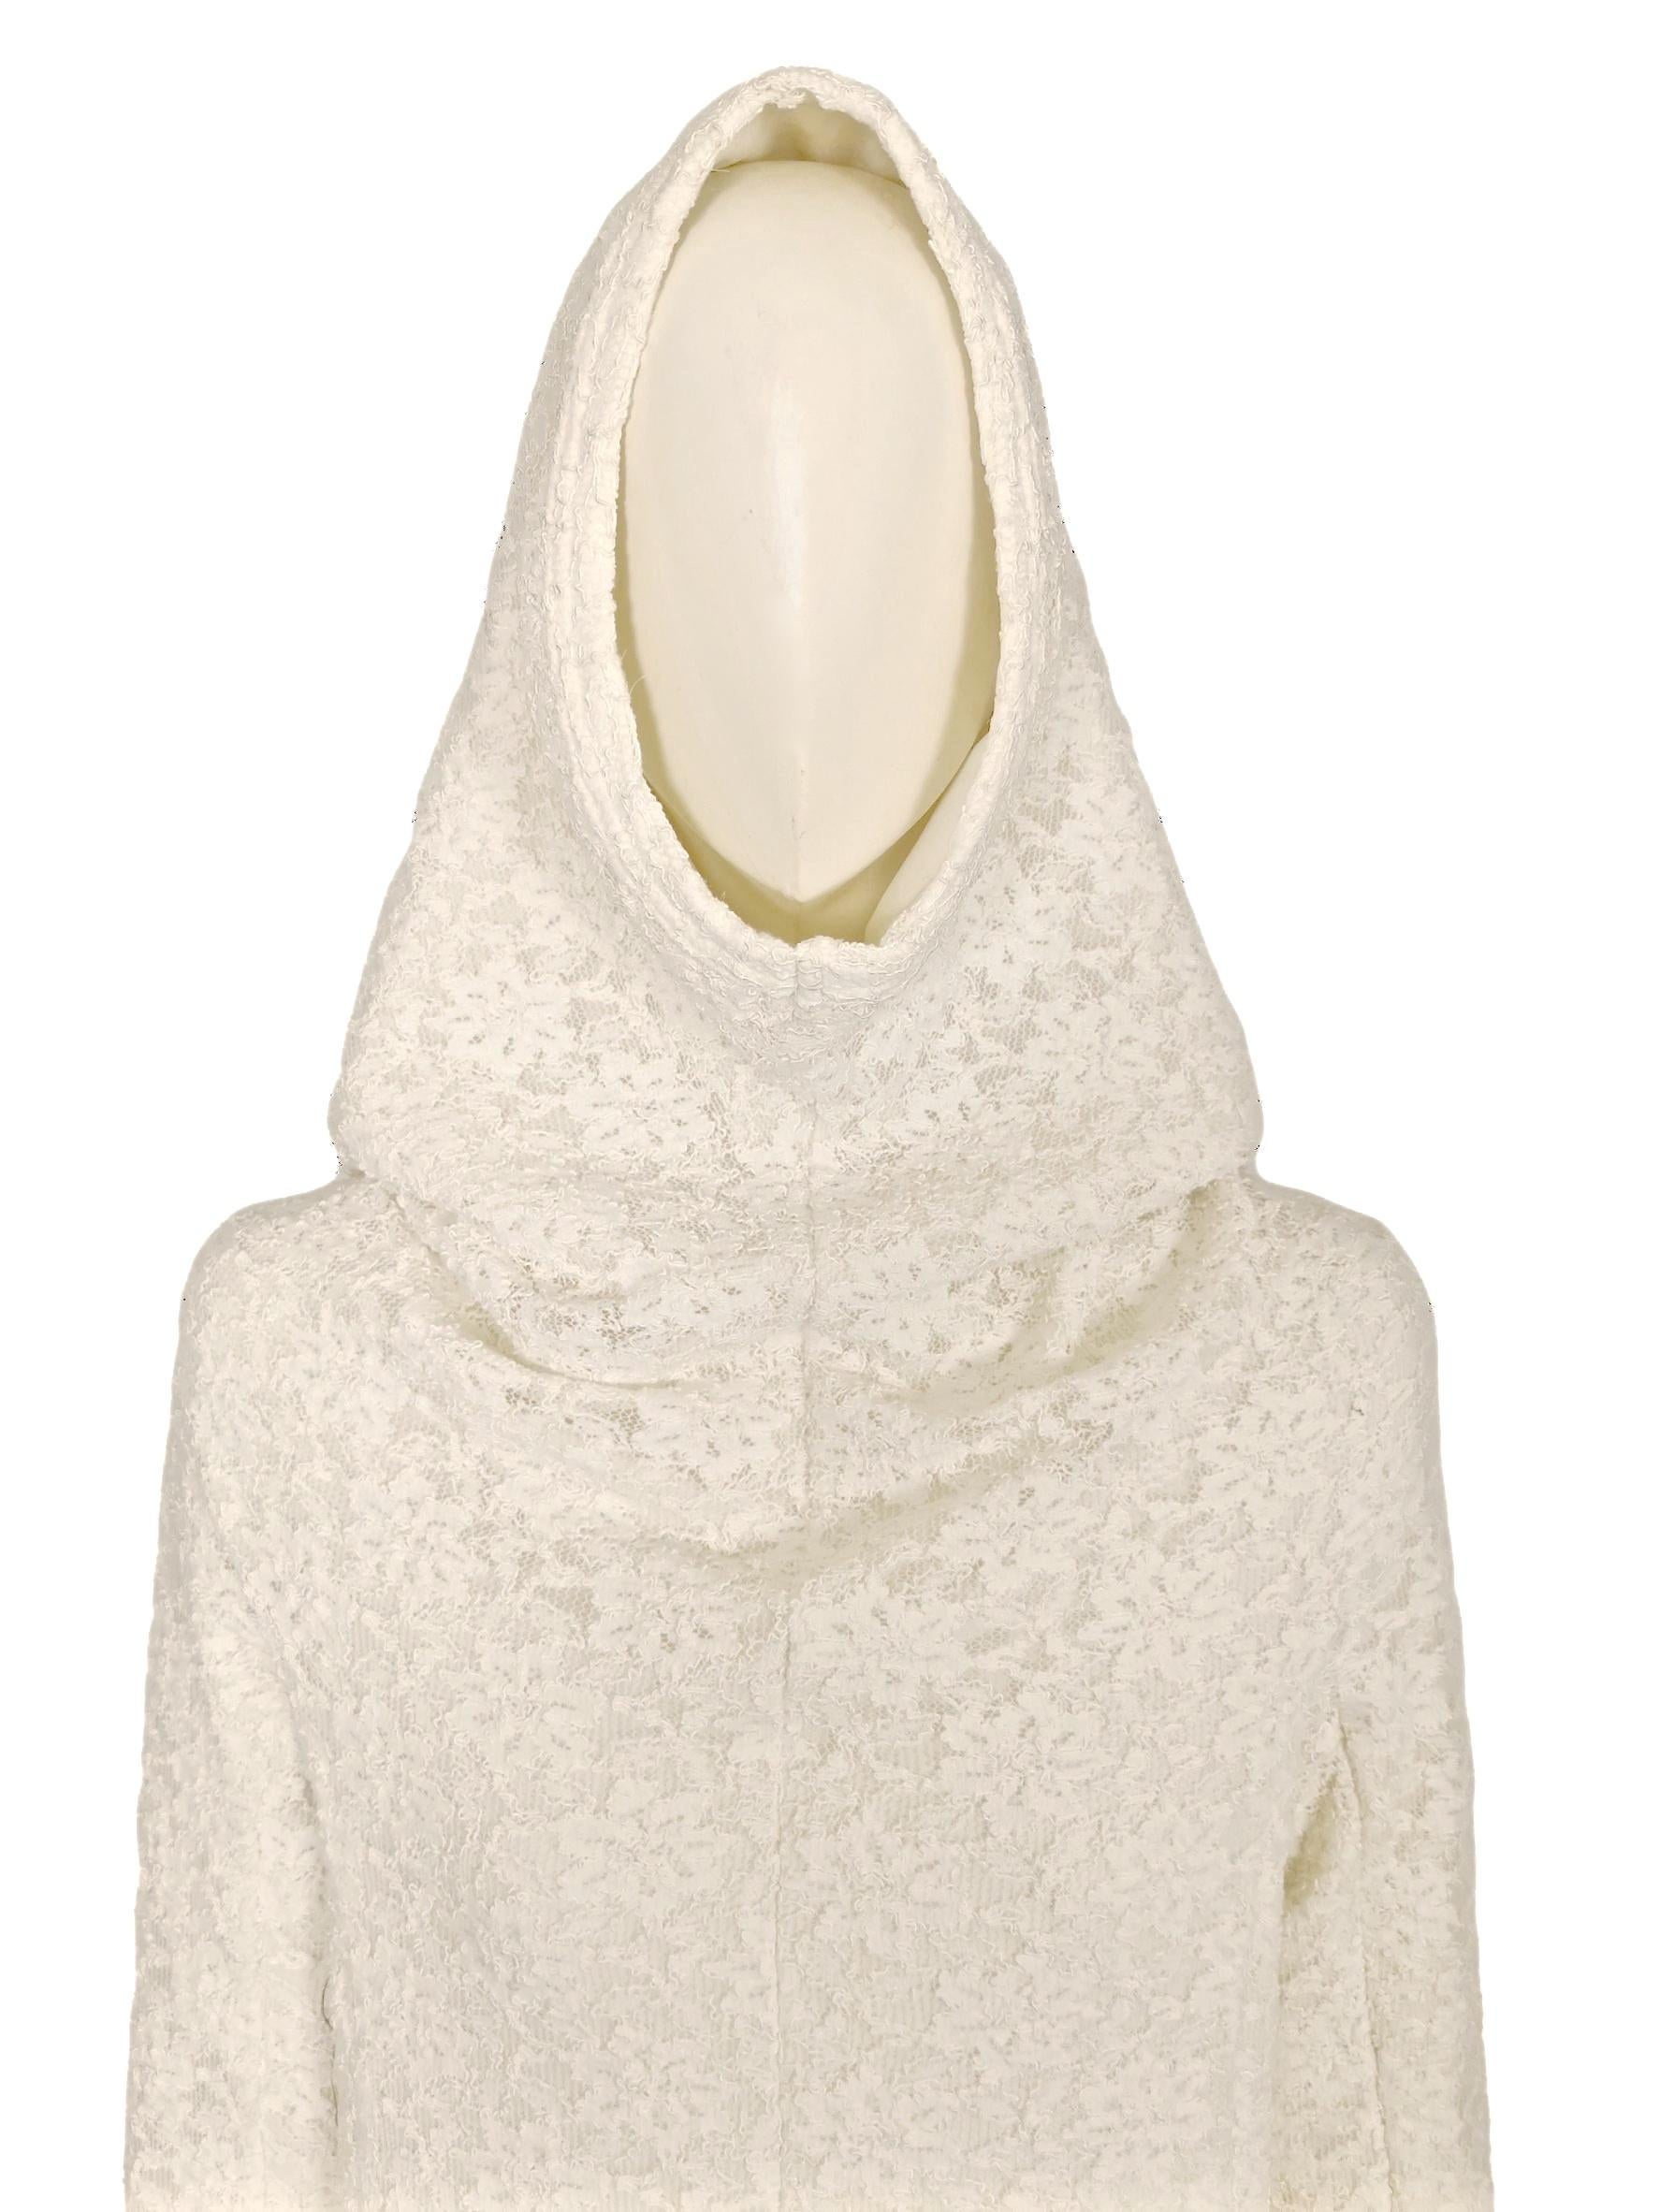 Women's Comme Des Garcons White Drama Cowl Hooded Dress AD 2011 For Sale